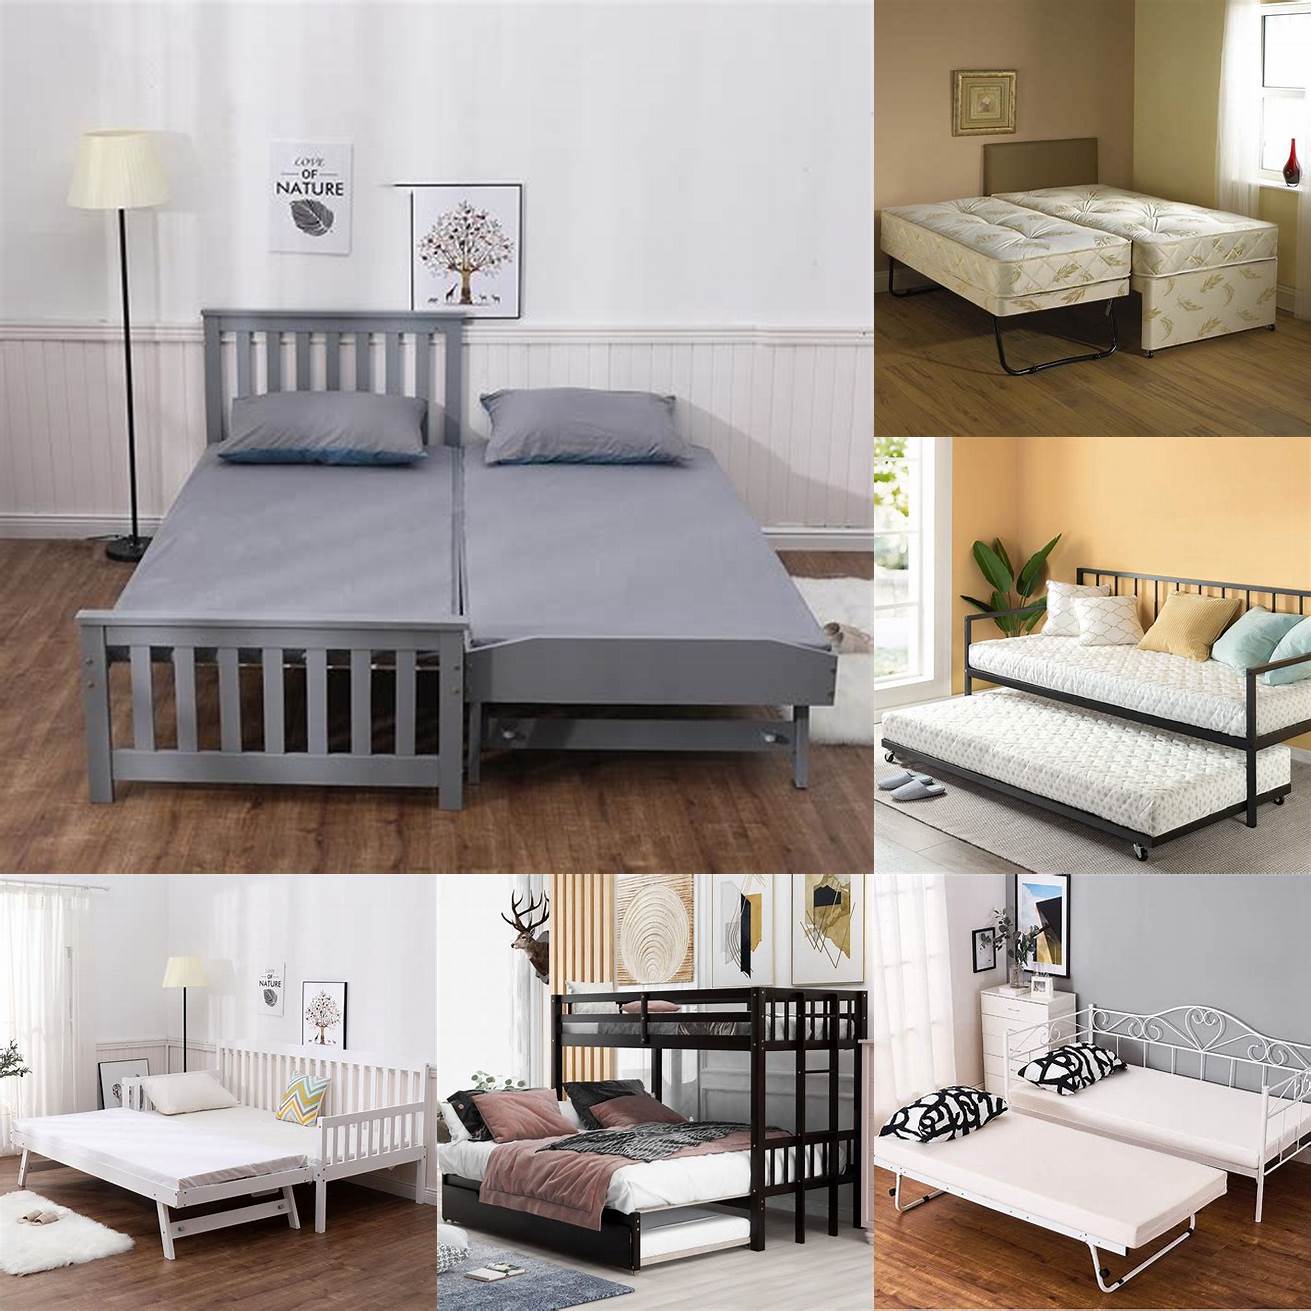 4 Trundle bed with pull-out guest bed